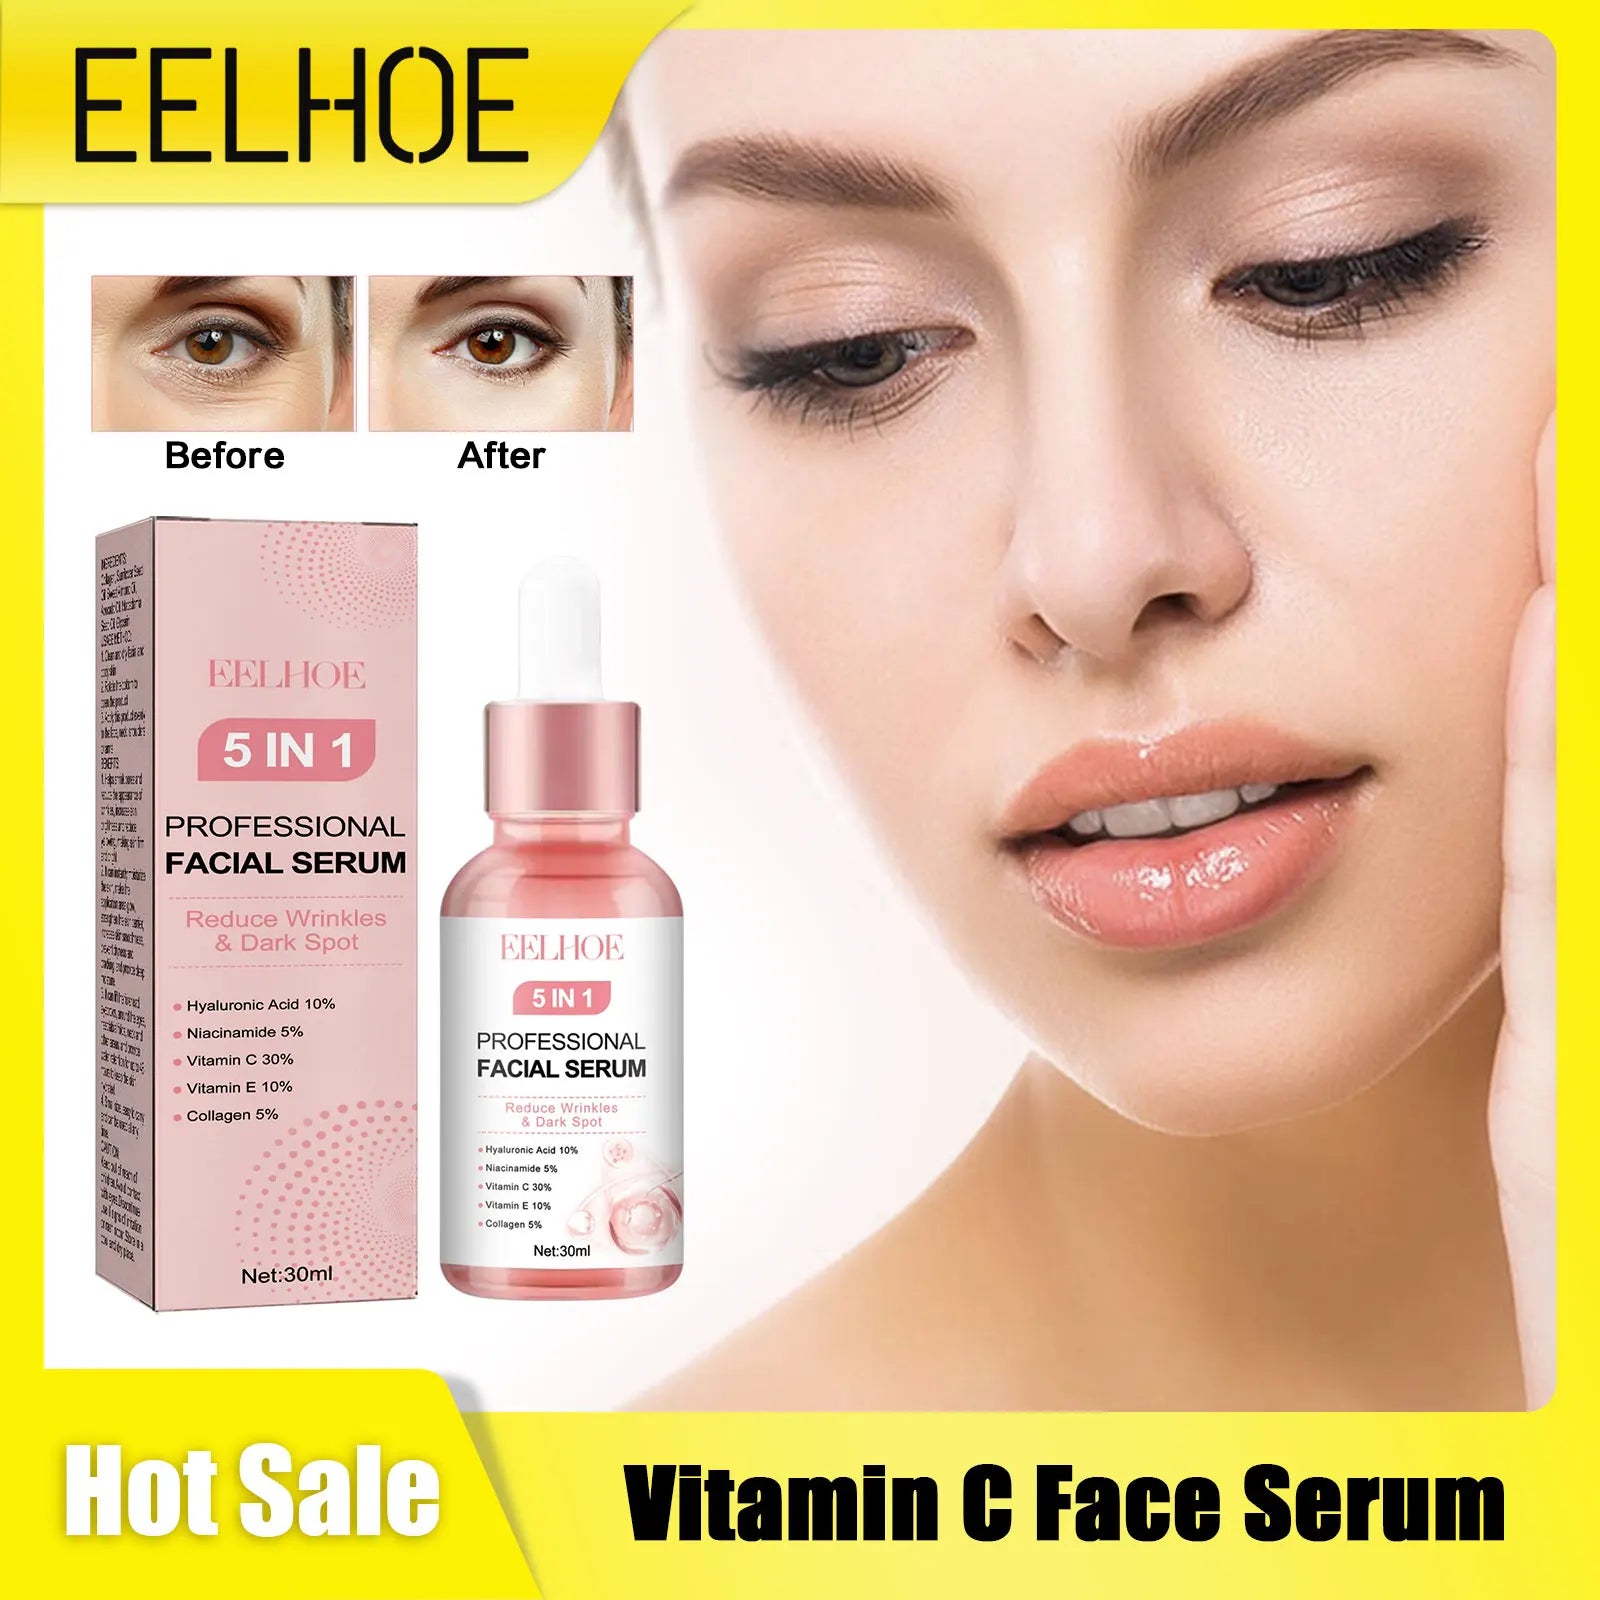 Vitamin C Face Serum 5 in 1 Nicotinamide Freckle Remover Natural Anti-Aging Essence Reduce Fine Lines Moisturizing Firming Skin